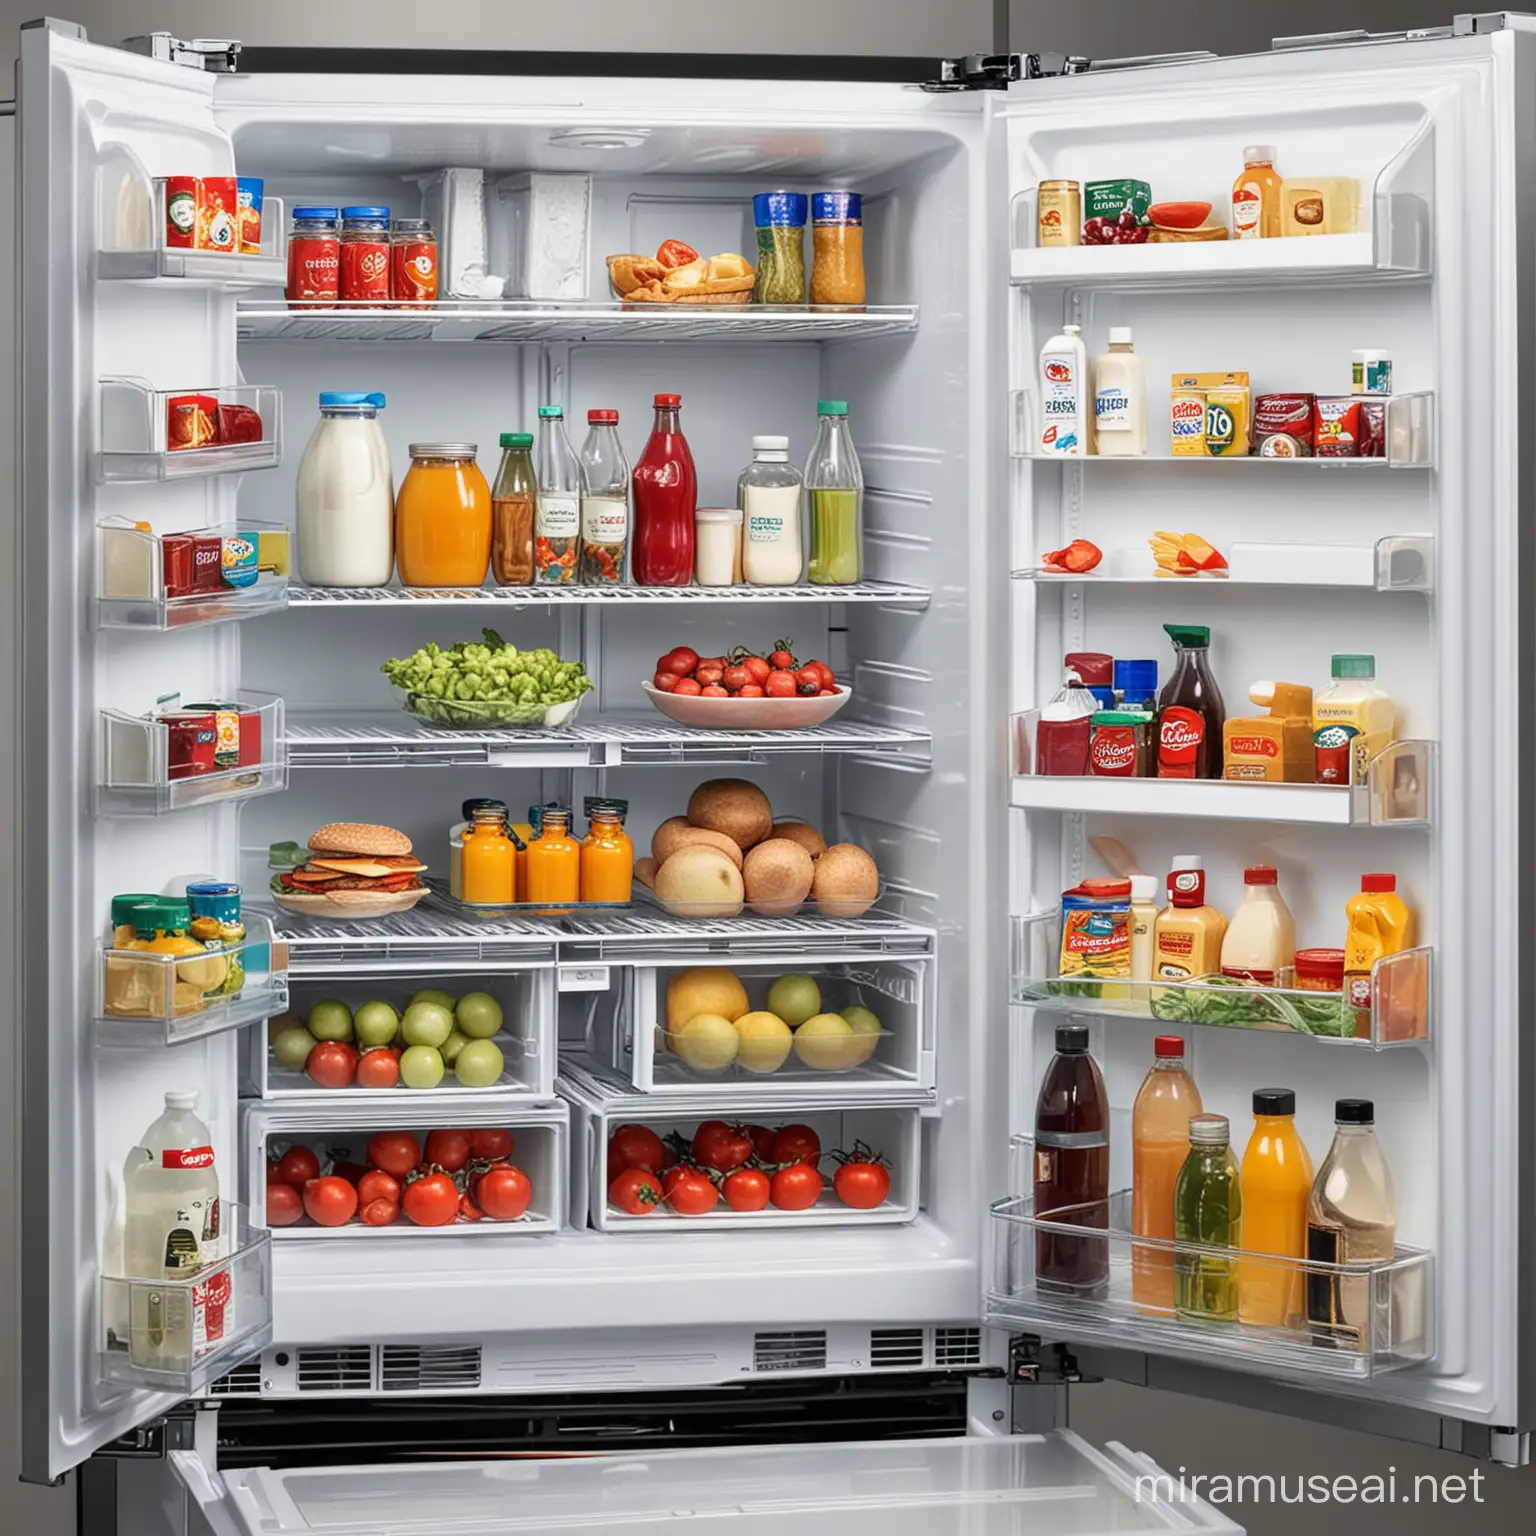 Variety of Products in Open Refrigerator